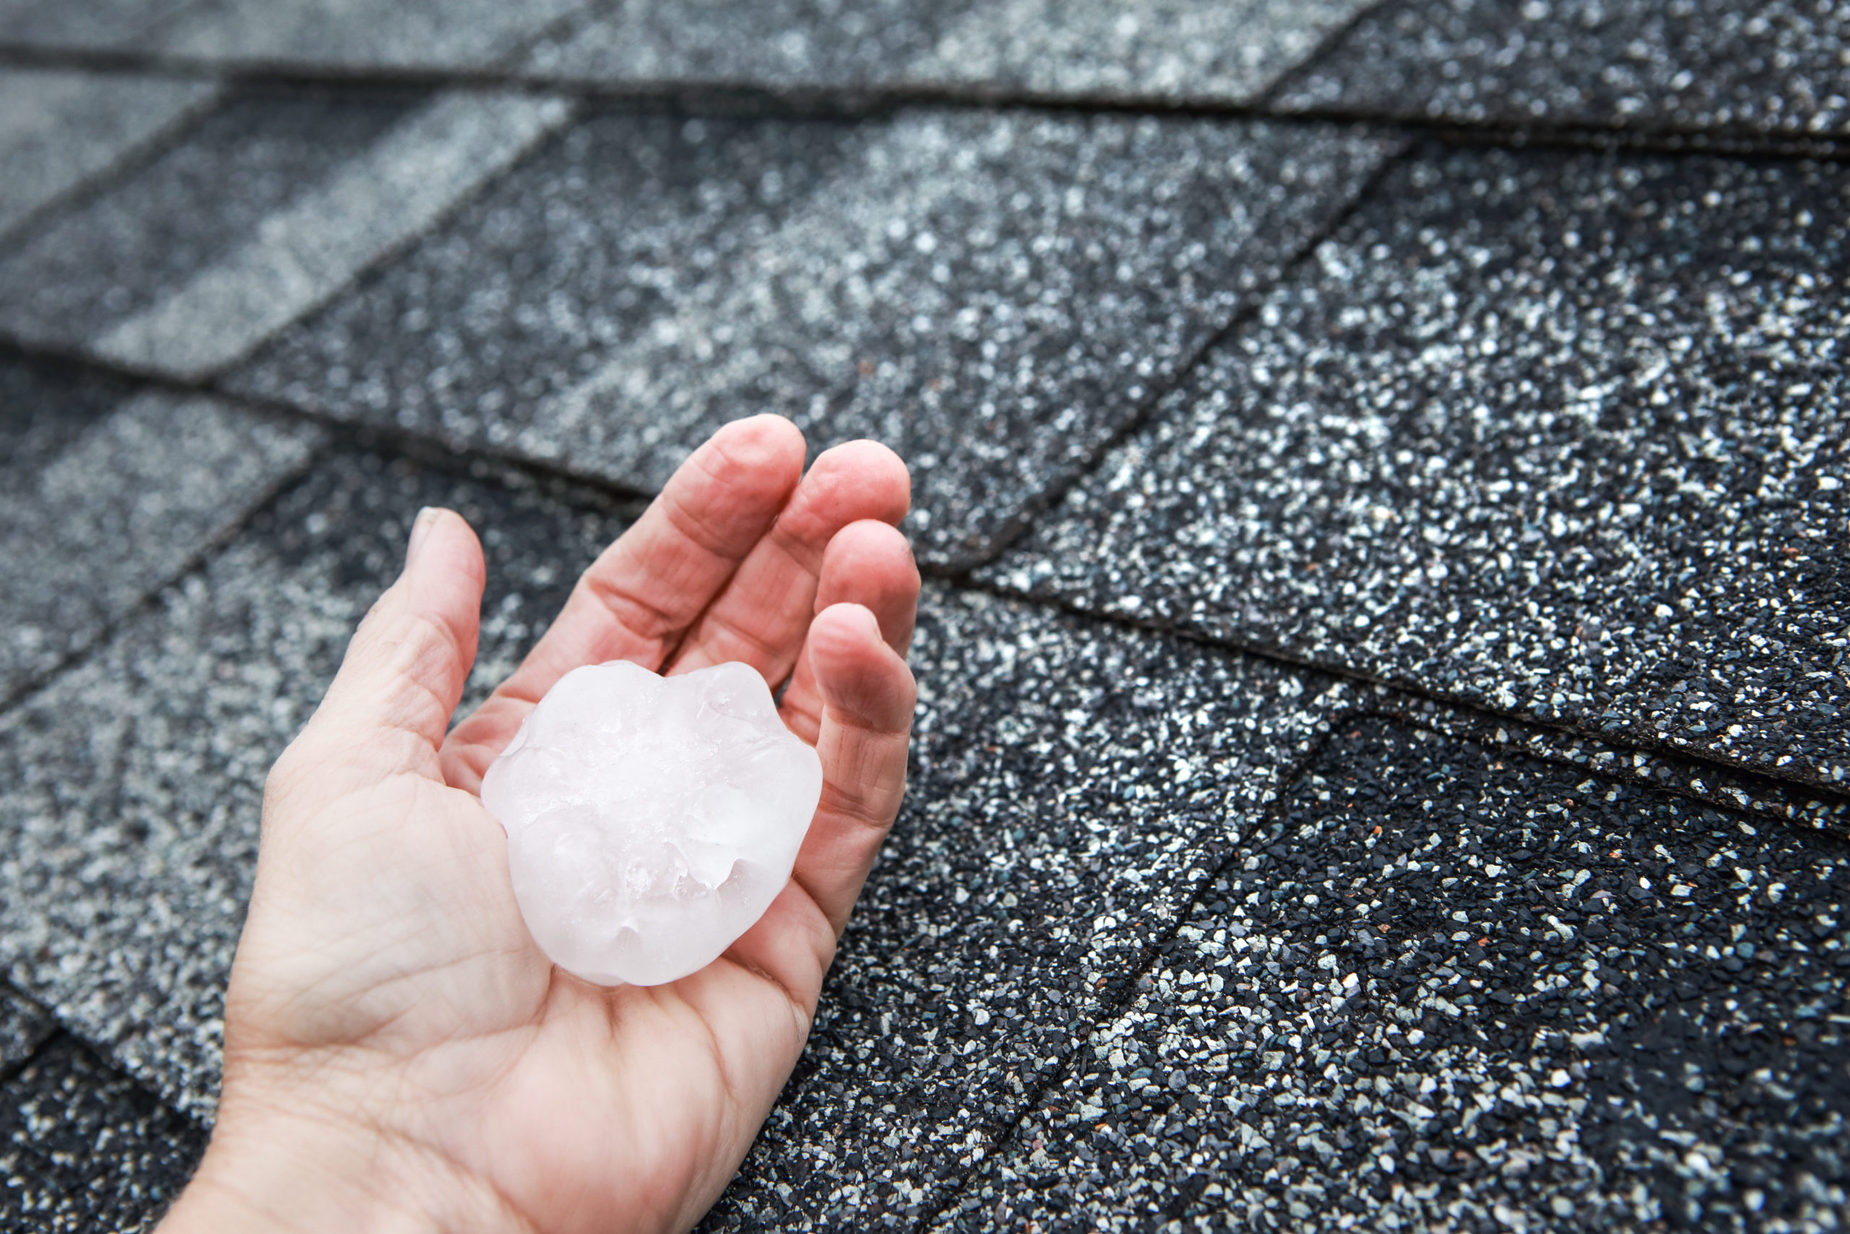 Hail damage can cause a lot of issues with your roof and siding, we'll help you weather the storm when it comes to repairs and insurance claims.